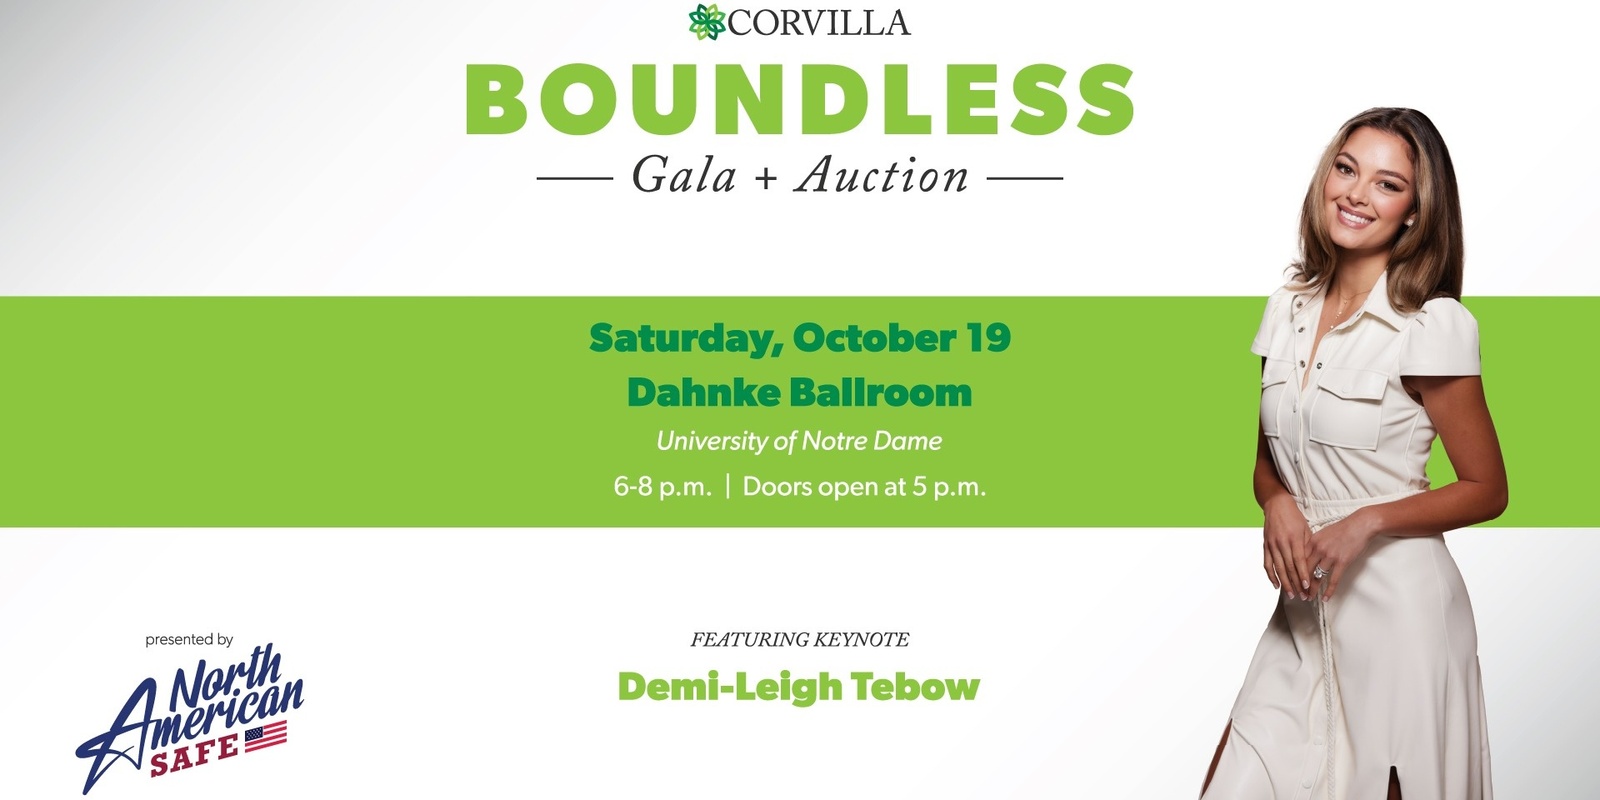 Banner image for Corvilla's Boundless Gala + Auction presented by North American Safe